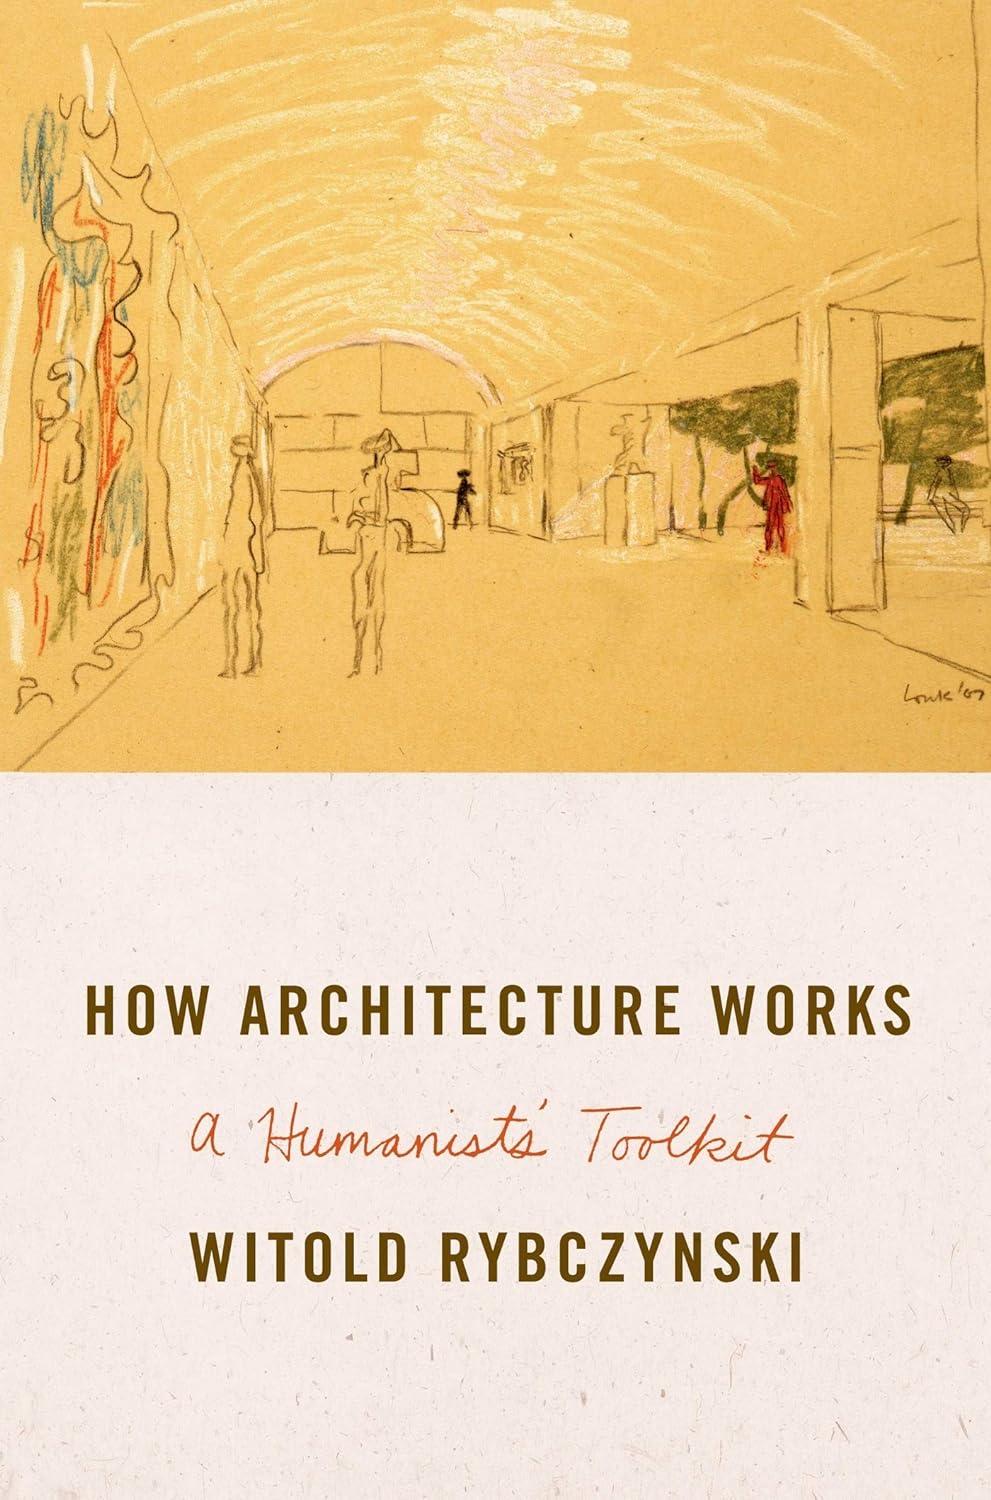 How Architecture Works: A Humanist's Toolkit, by Witold Rybczynski